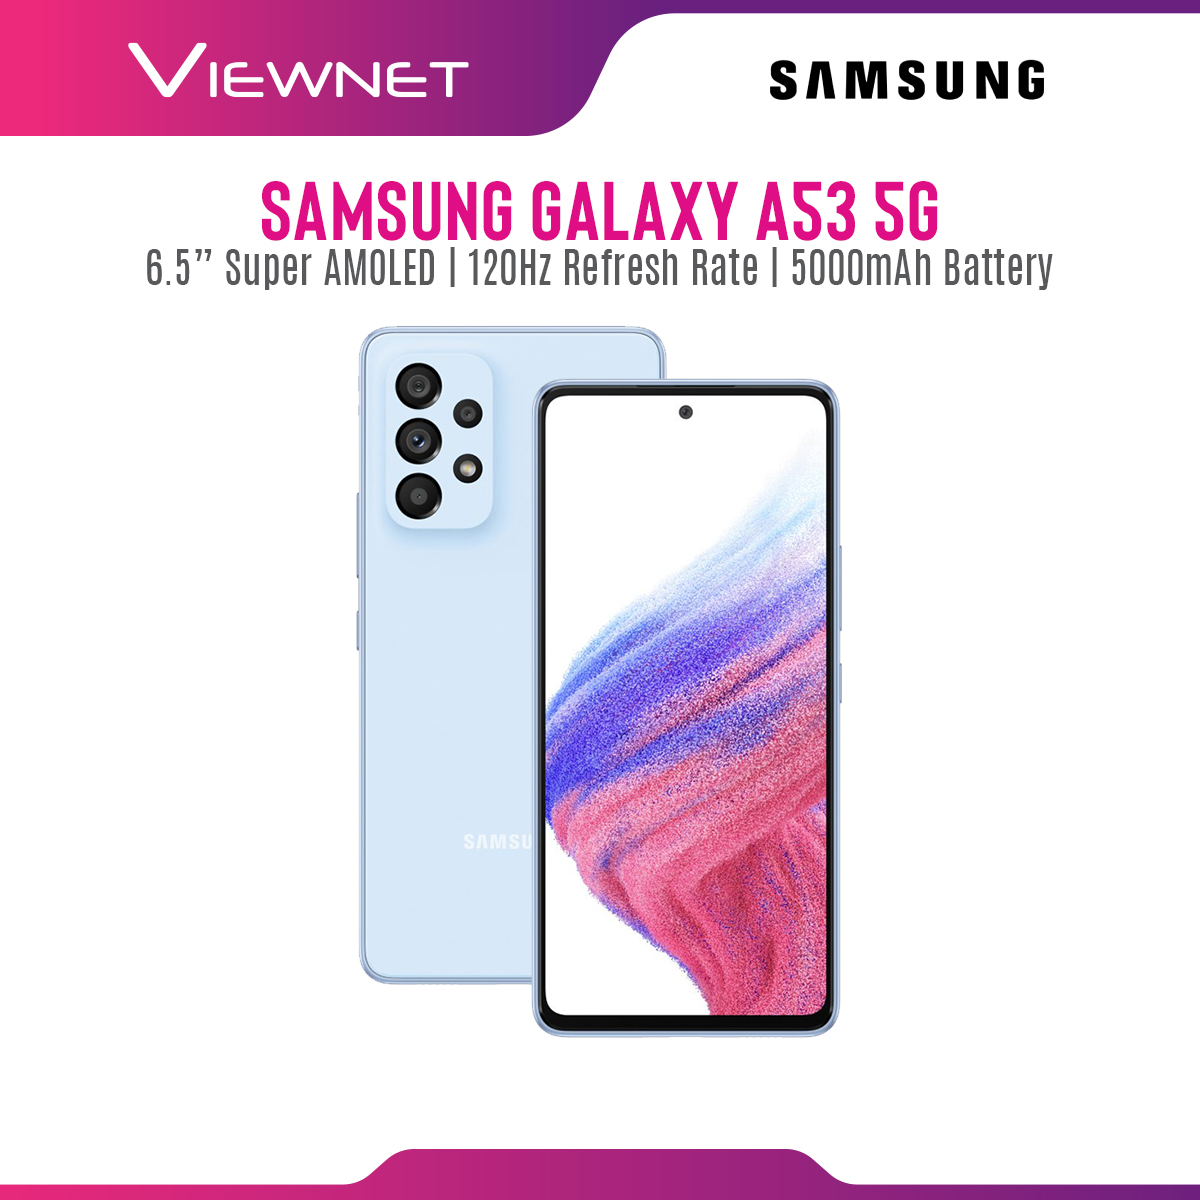 Samsung Galaxy A53 ( Blue ) 5G Smartphone with 6.5" Super AMOLED Display, 120Hz Refresh Rate, Android 12, MicroSD Slot Up to 1TB, 5000 mAh Battery